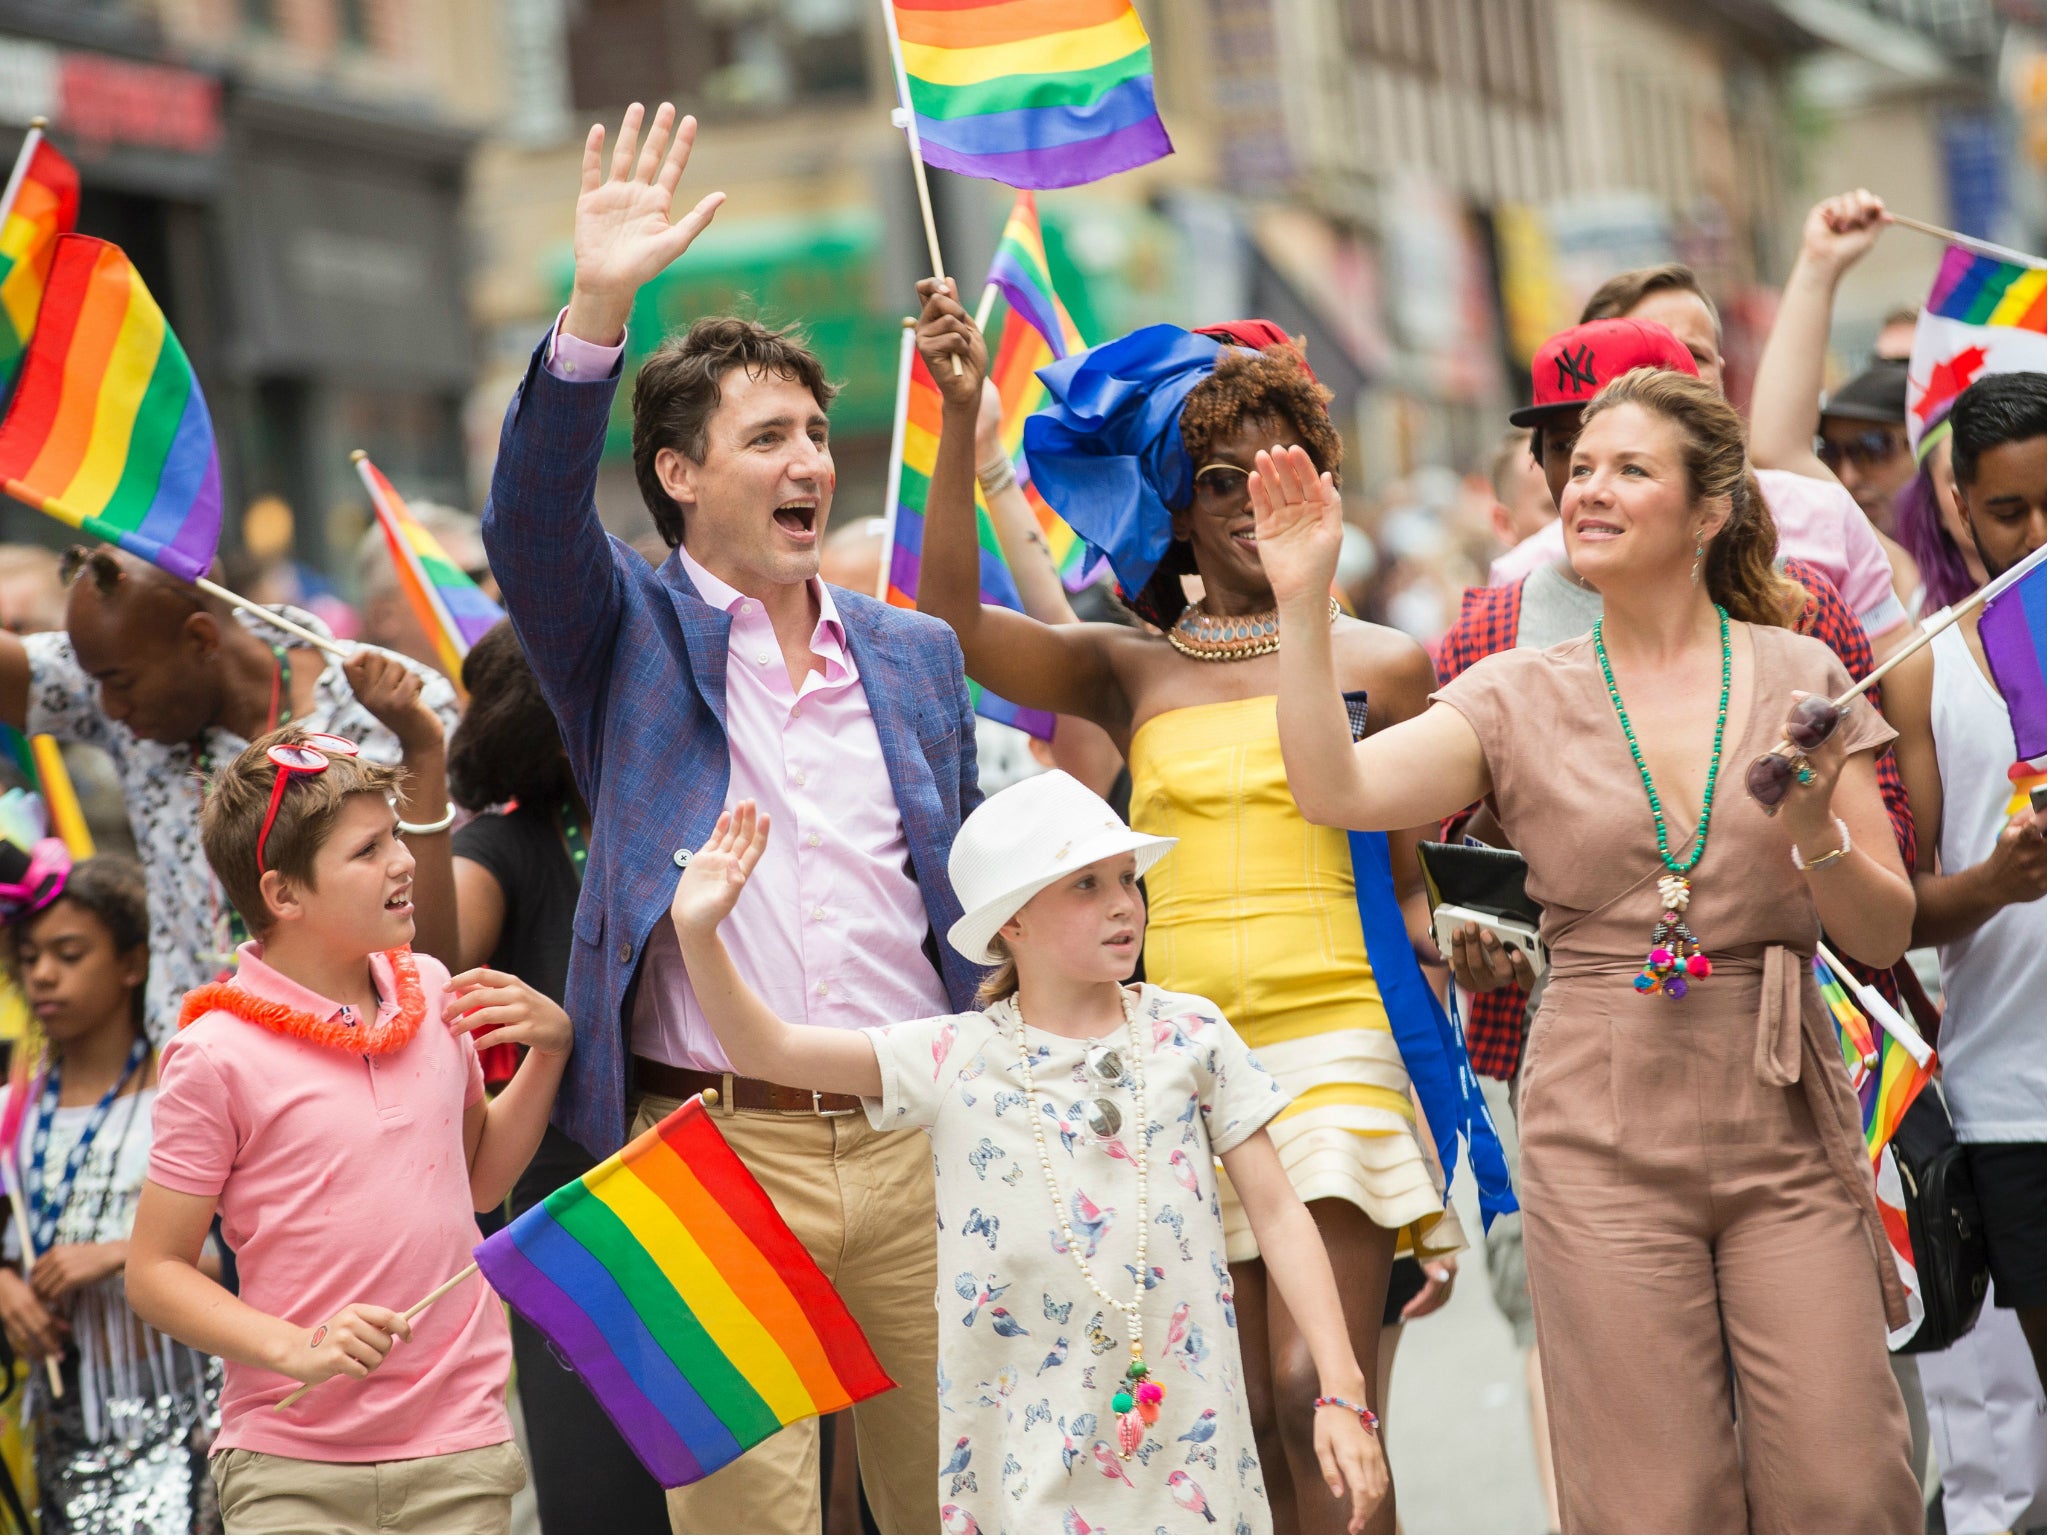 Canadian Prime Minister Justin Trudeau waves to the crowd as he, his wife Sophie Gregoire Trudeau and their children march in the Pride Parade in Toronto, 25 June 2017